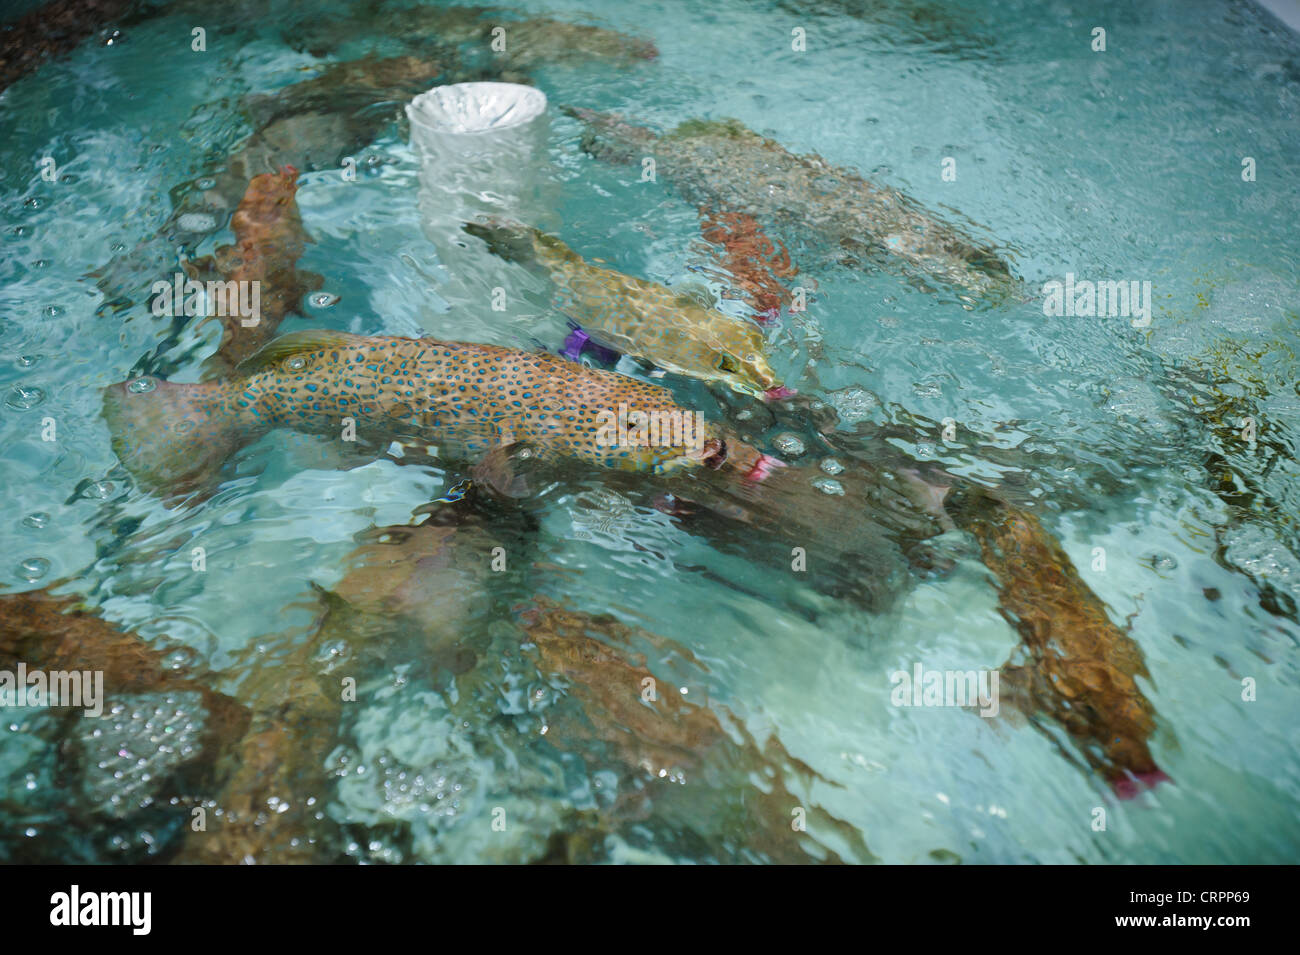 Live grouper in a holding tank at the Pulau Mas facility in Denpasar, Bali, Indonesia. Stock Photo